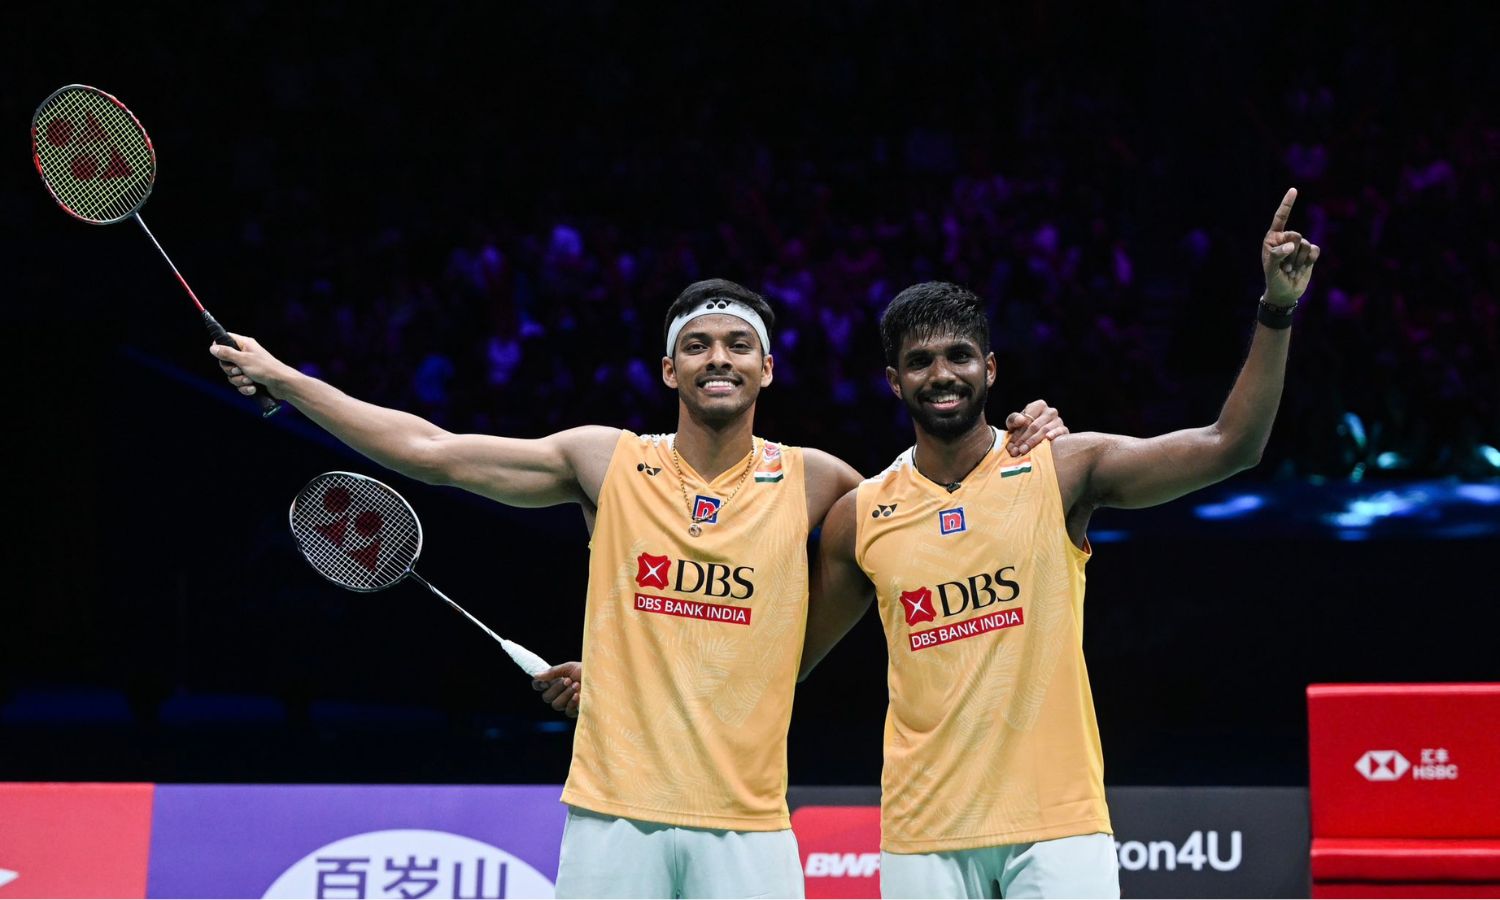 You are currently viewing Satwik-Chirag beats Fikri-Maulana in straight games, Prannoy knocked out